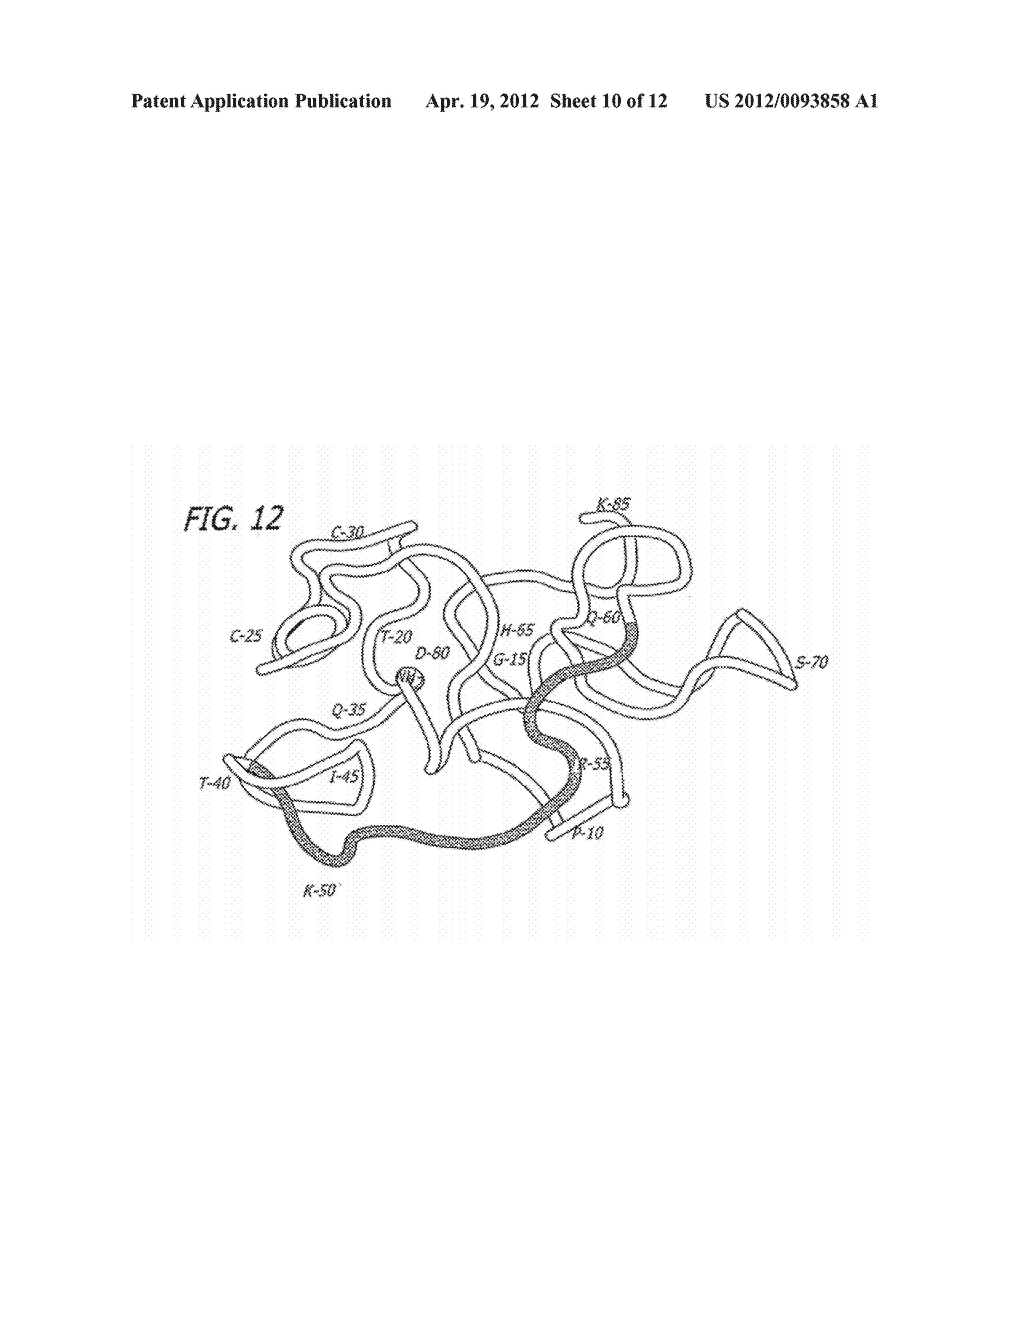 Tat-Based Tolerogen Compositions and Methods for Making and Using Same - diagram, schematic, and image 11